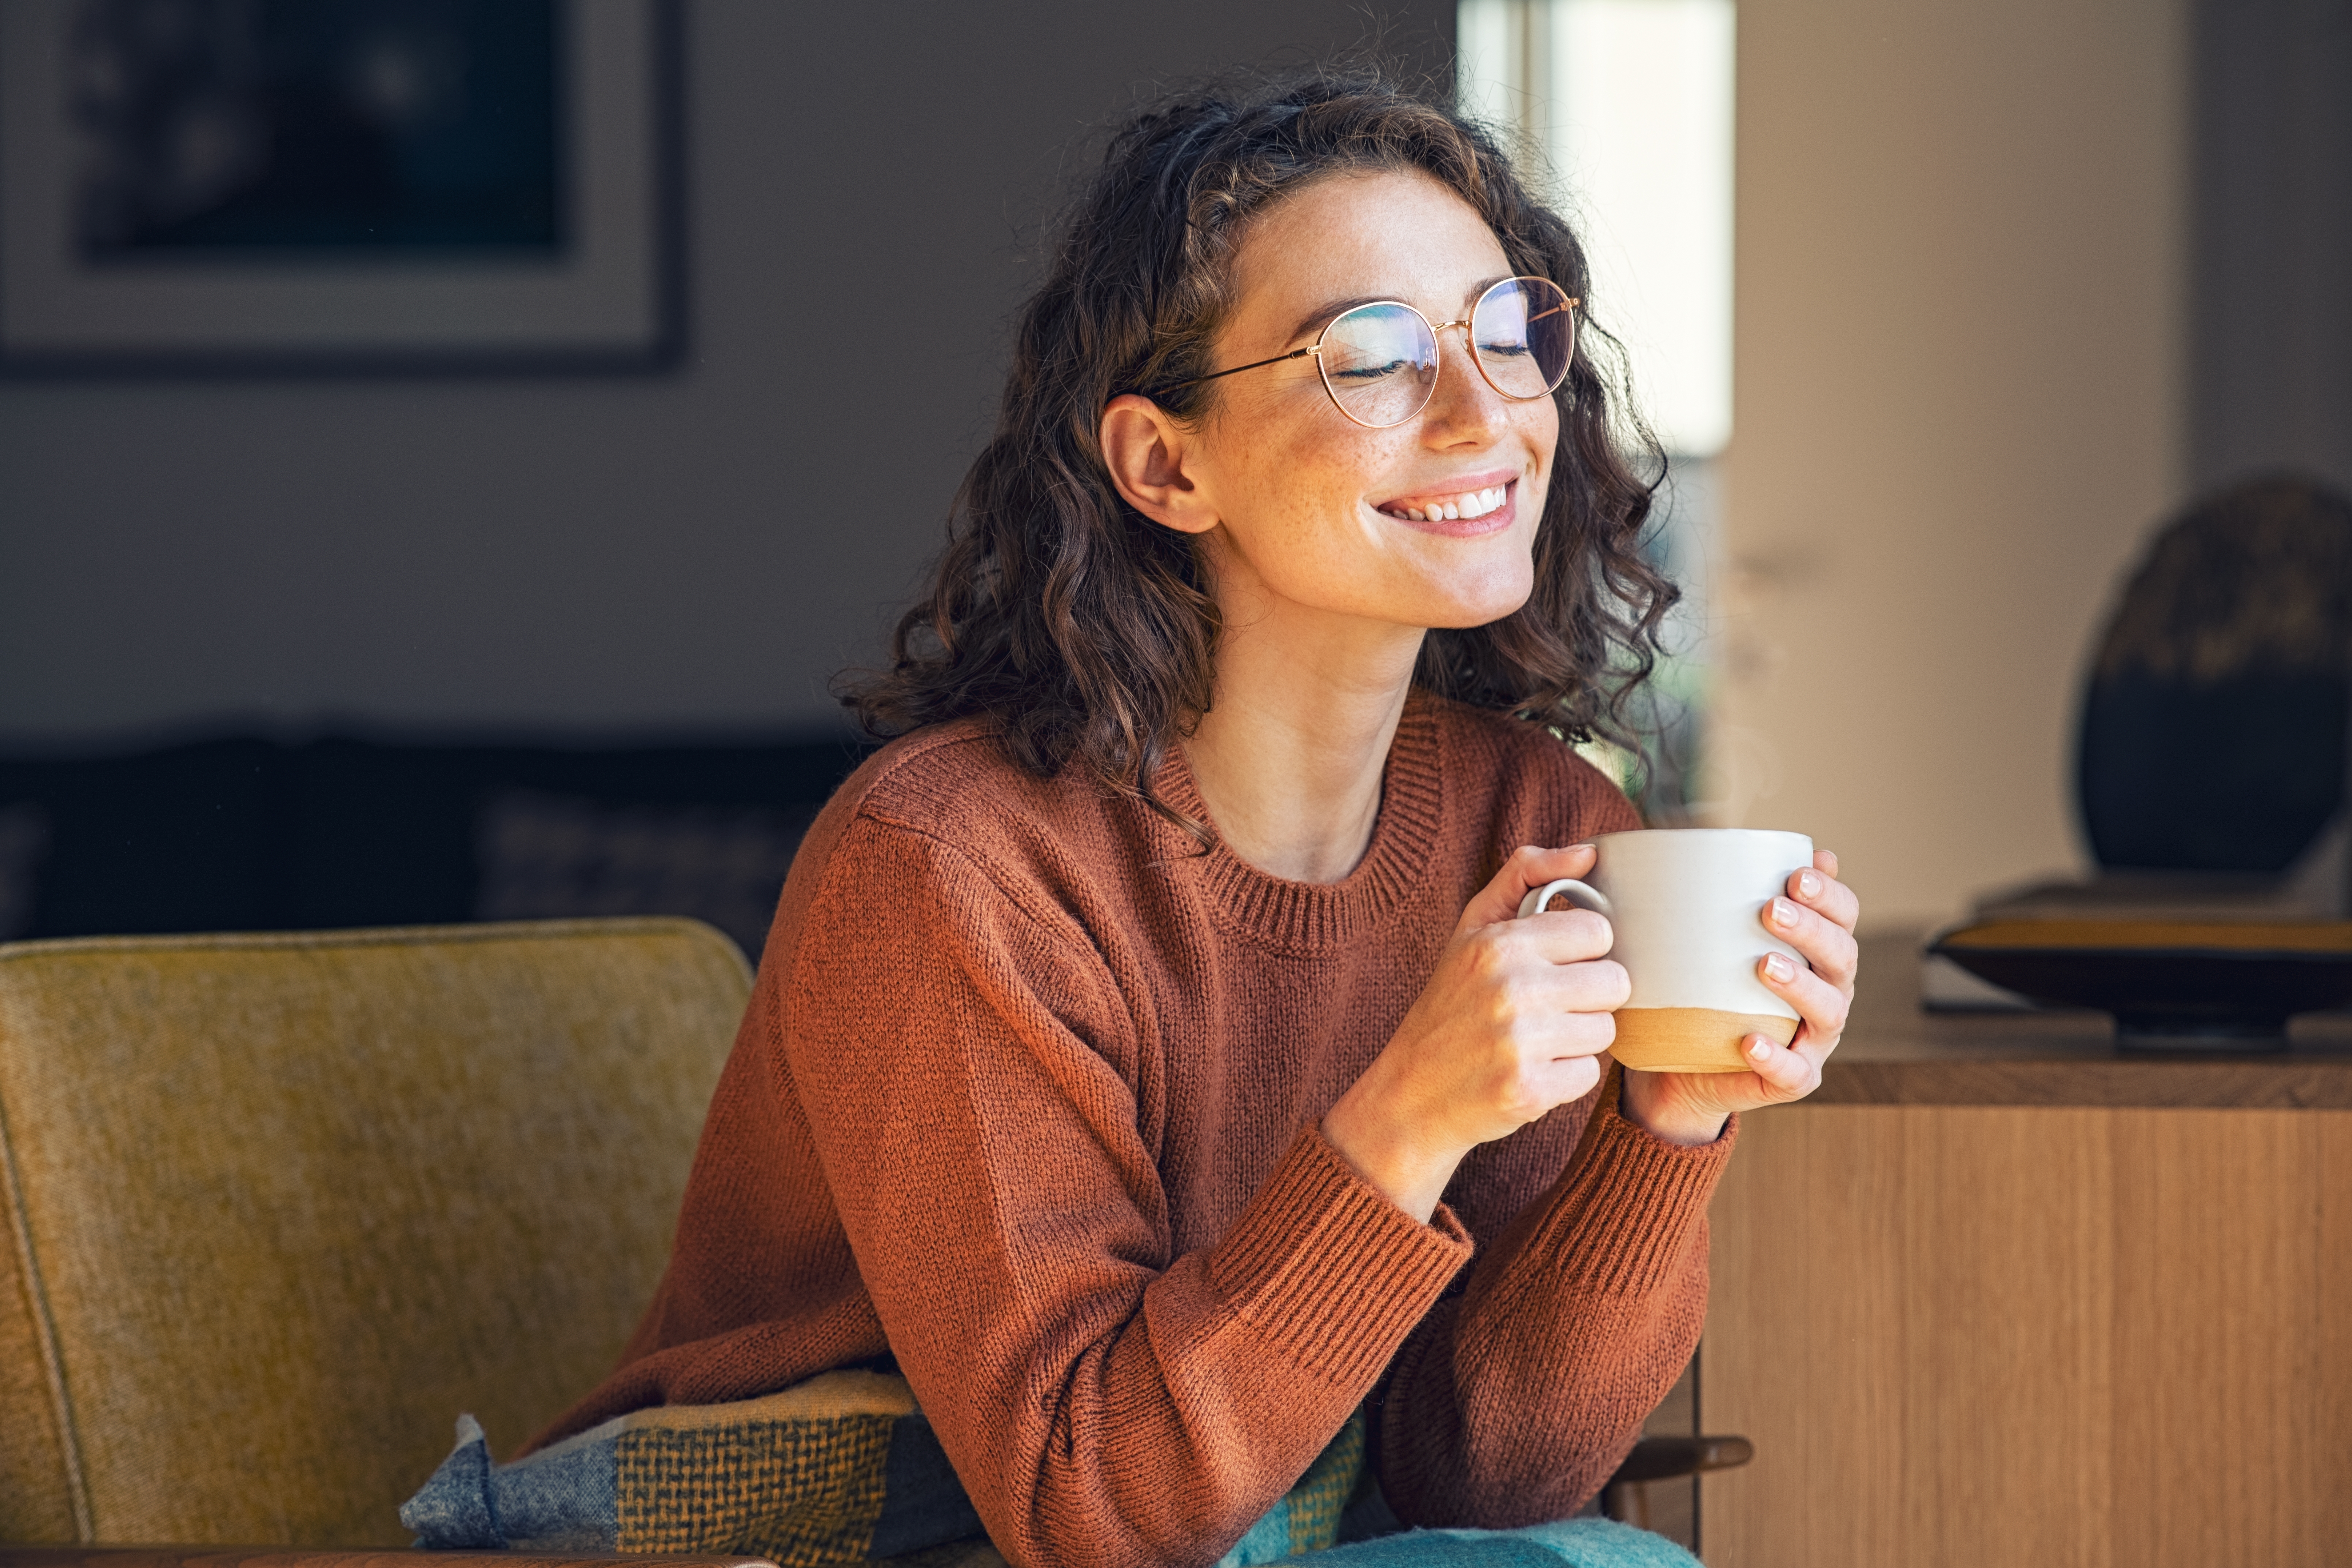 Woman in brown sweater smiling while holding cup of tea